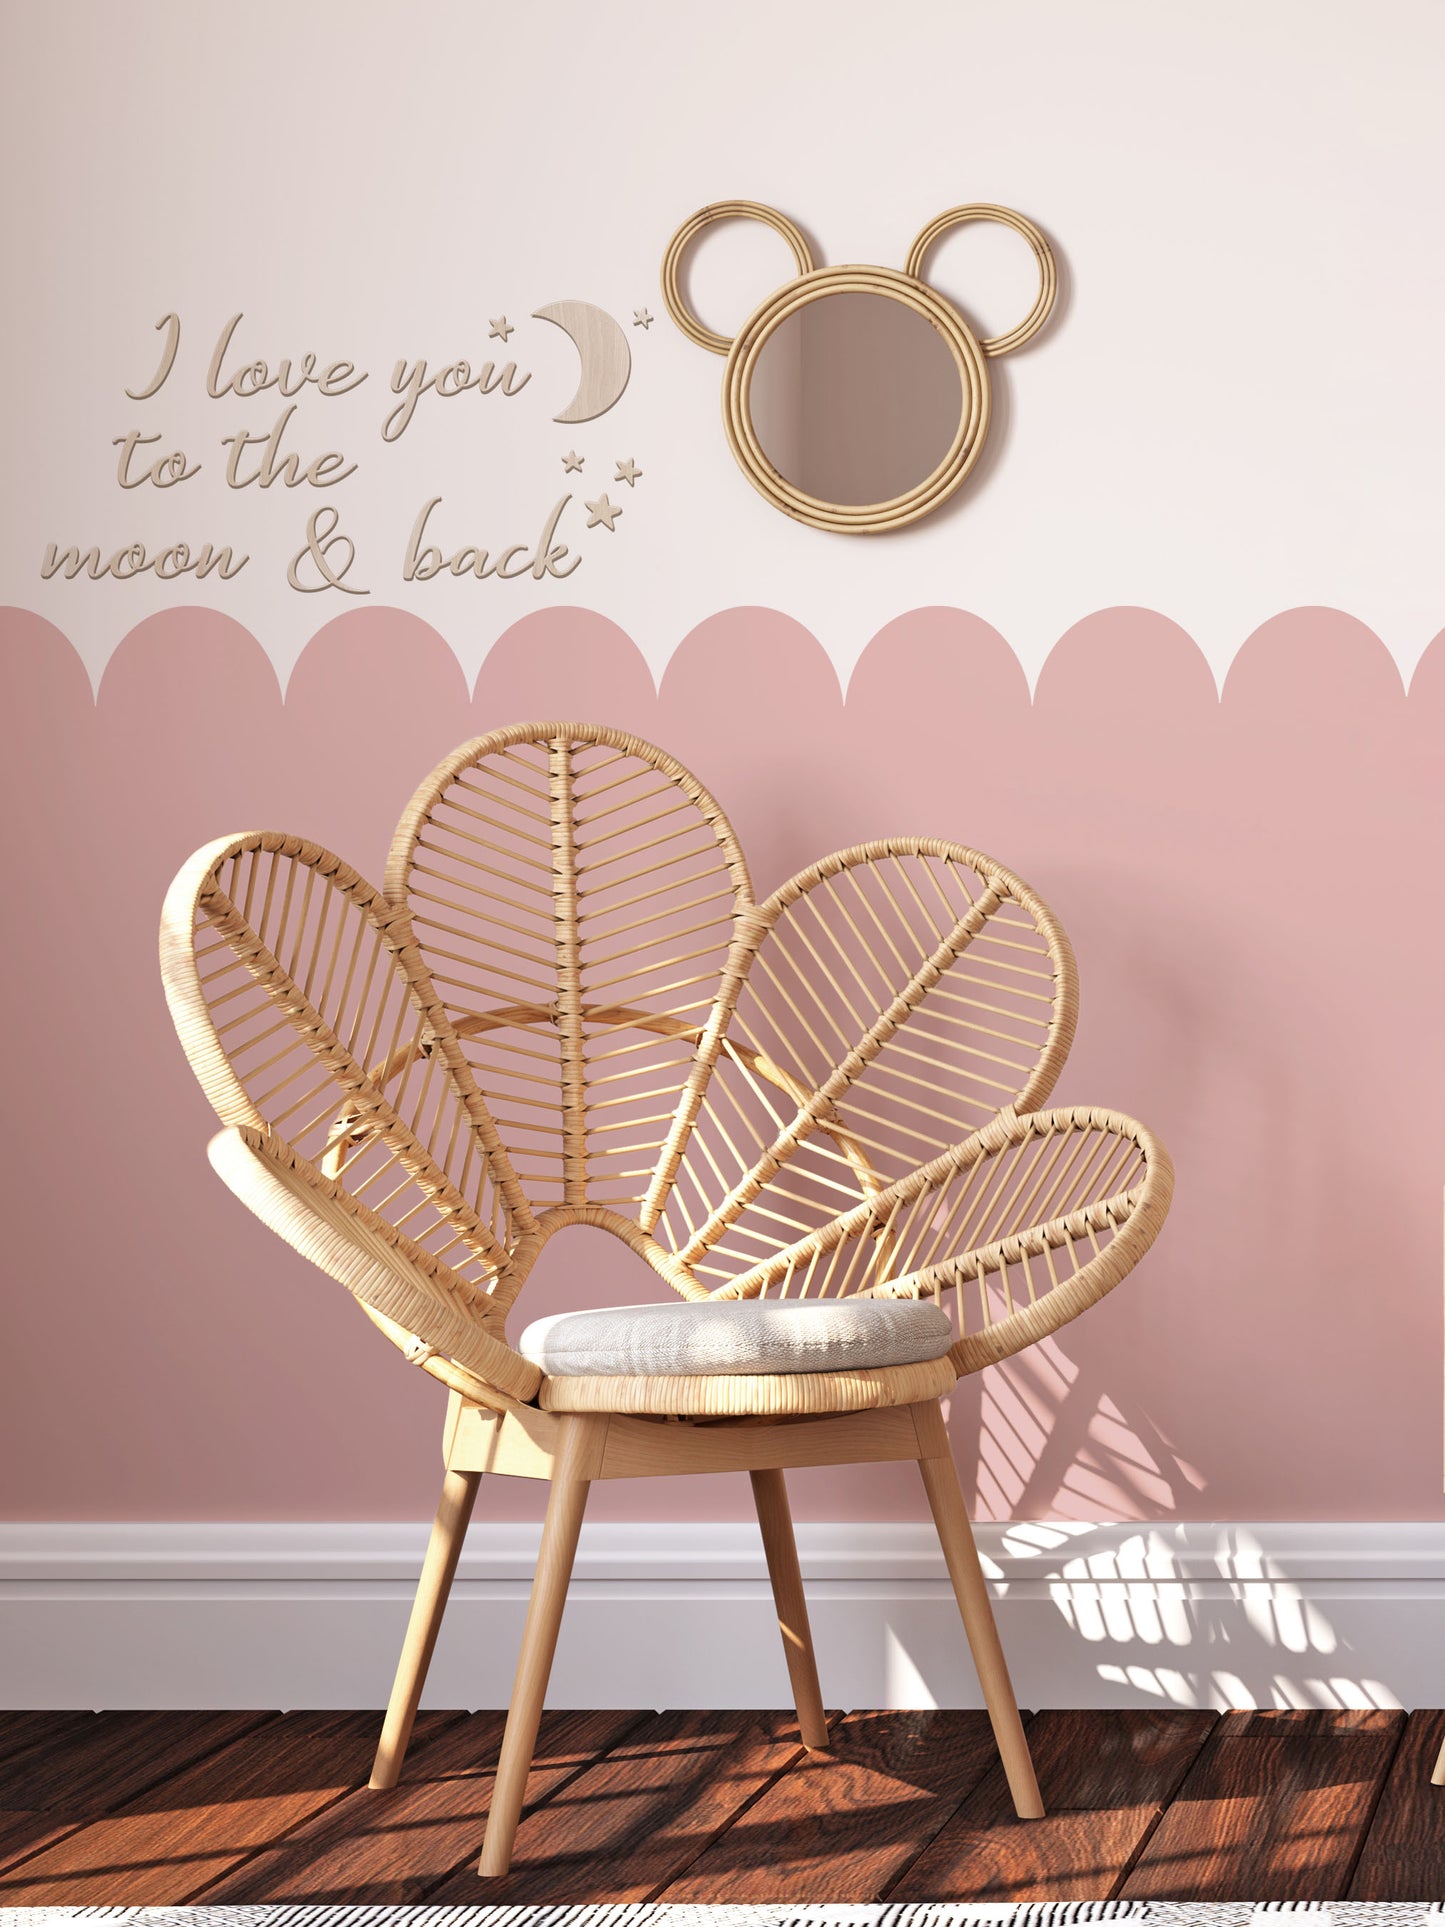 I love you to the moon and back - Wall Decals - Fable and Fawn 